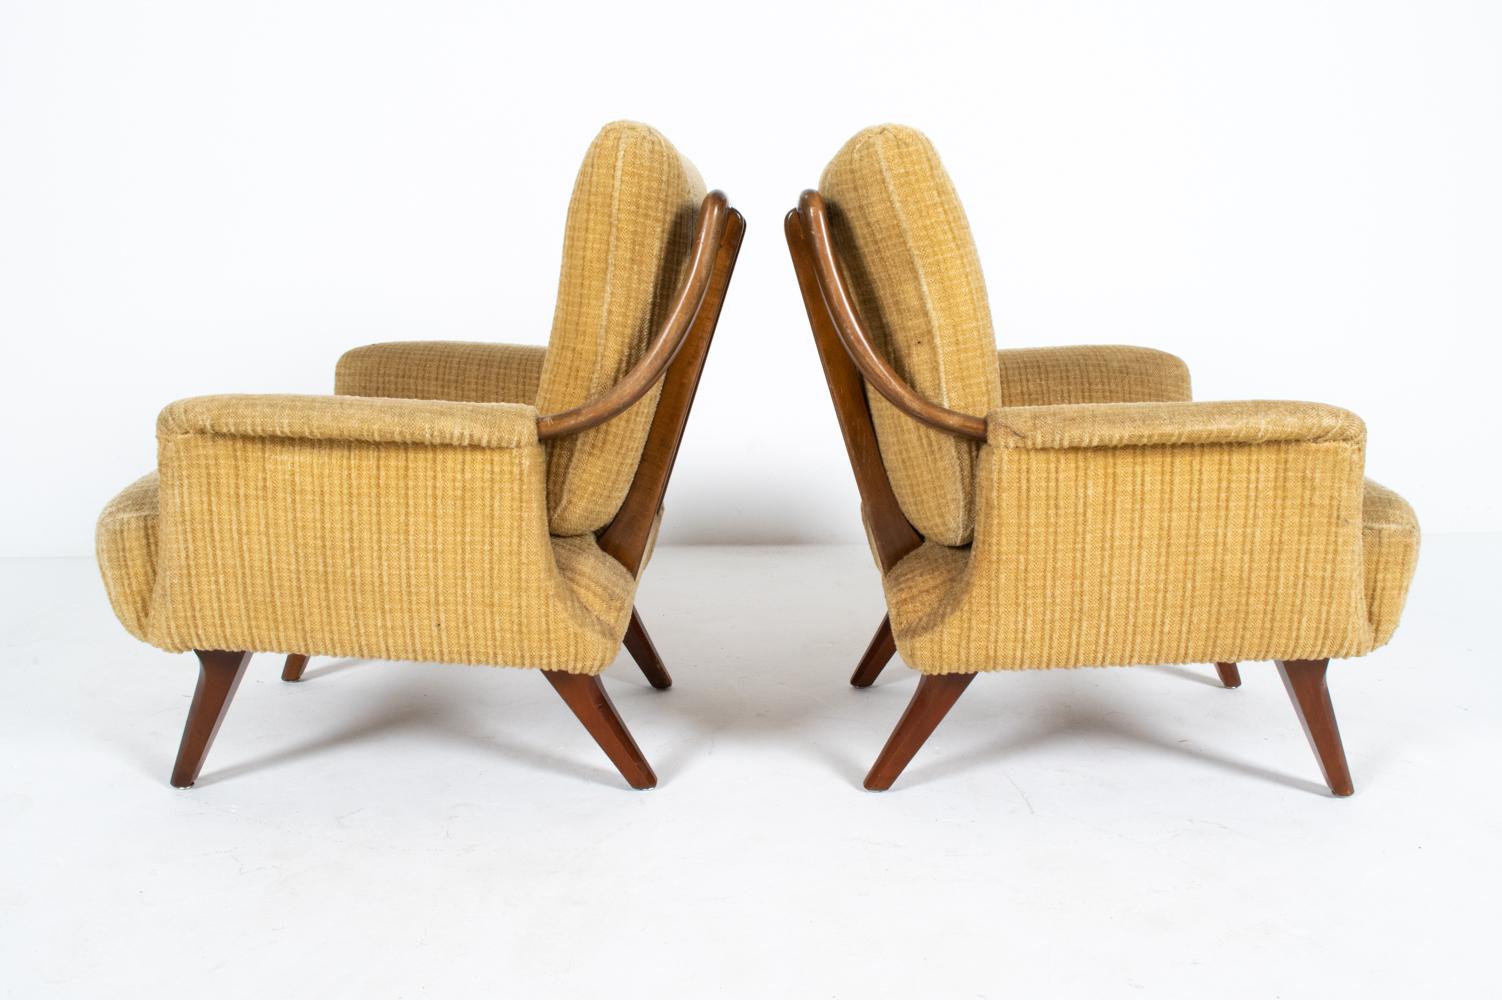 Pair of Scandinavian Mid-Century Lounge Chairs, c. 1950's For Sale 2